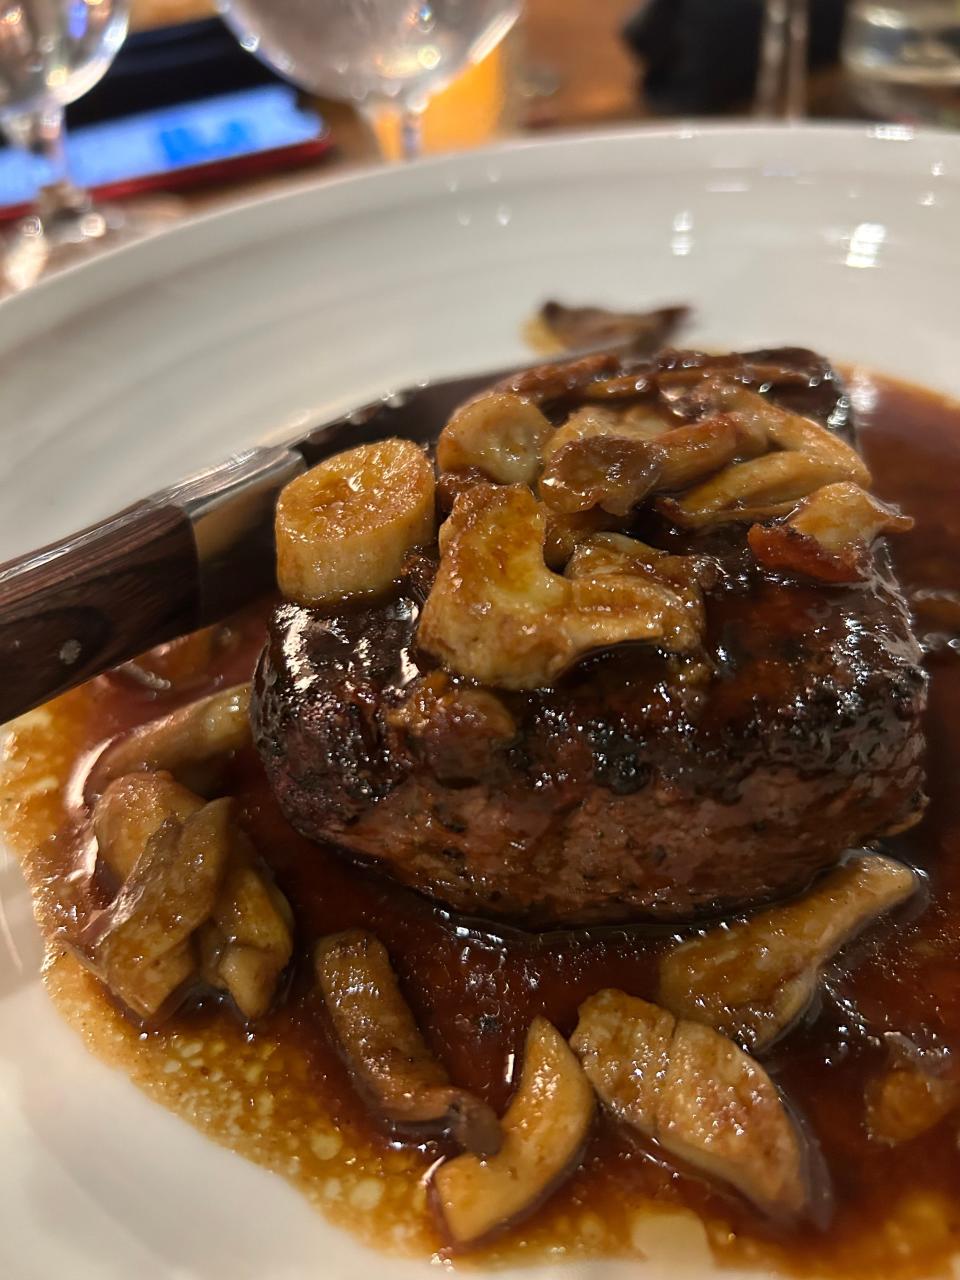 A 6-ounce prime filet with mushroom demi-glace at Pitchfork.